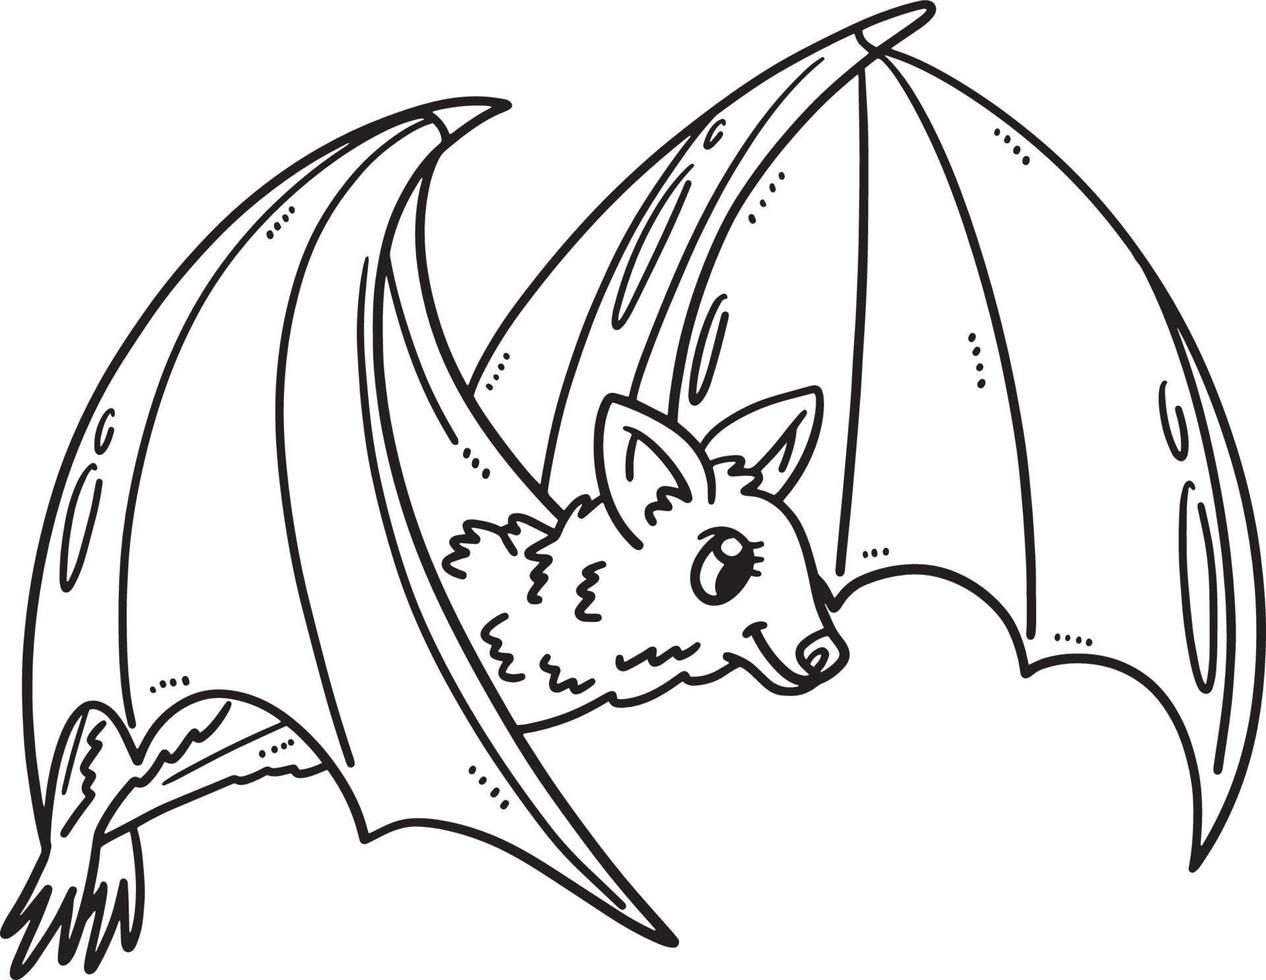 Mother Bat Isolated Coloring Page for Kids vector